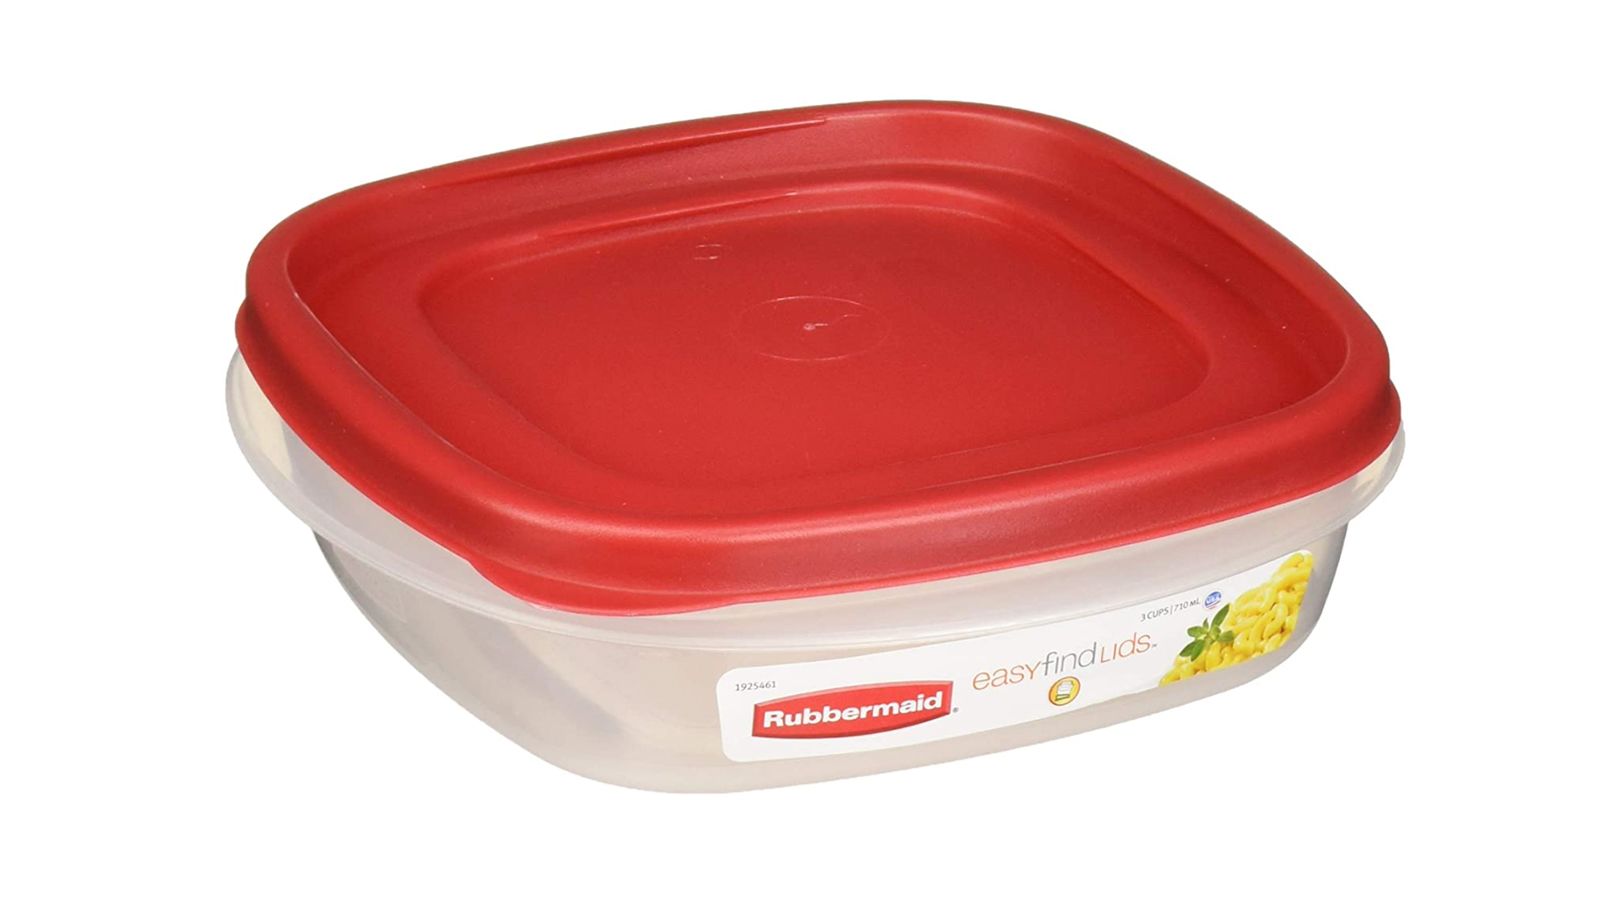 https://media.cnn.com/api/v1/images/stellar/prod/210930103732-best-meal-prep-containers-rubbermaid-easy-find-lids-square-3-cup-food-storage-container-4-se.jpg?q=w_1600,h_900,x_0,y_0,c_fill